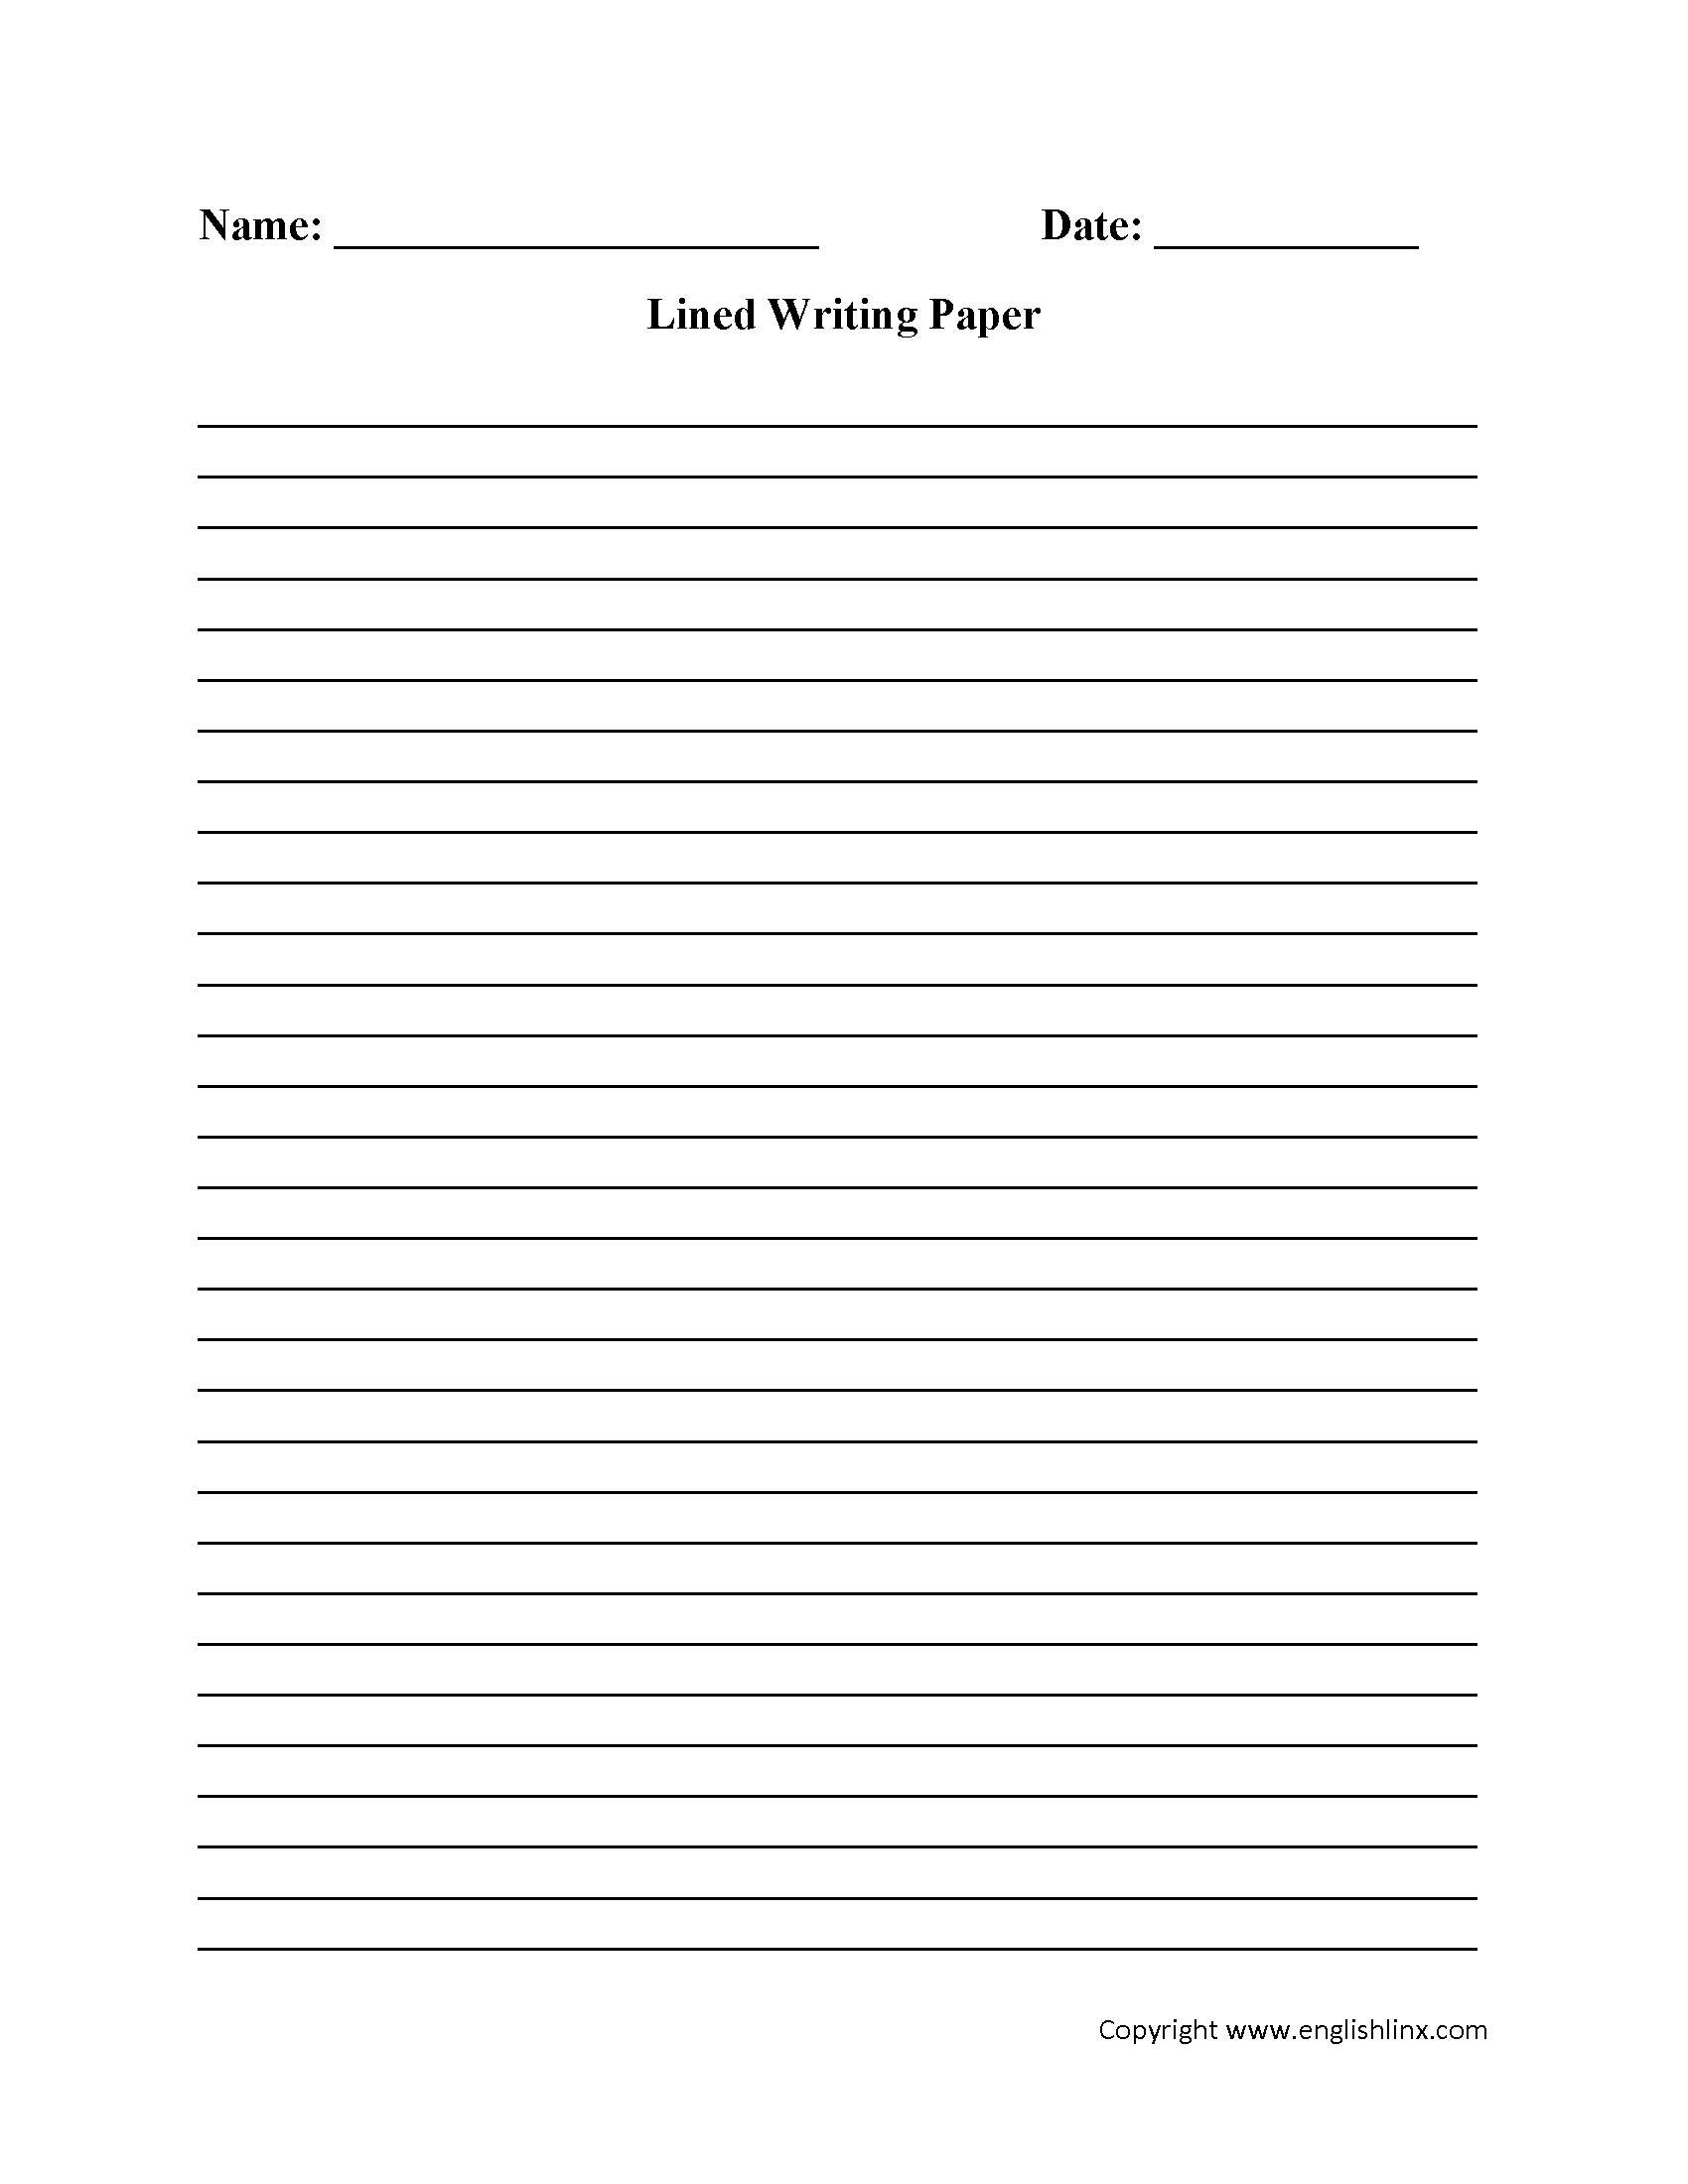 Writing Worksheets | Lined Writing Paper Worksheets - Free Printable Writing Paper For Adults